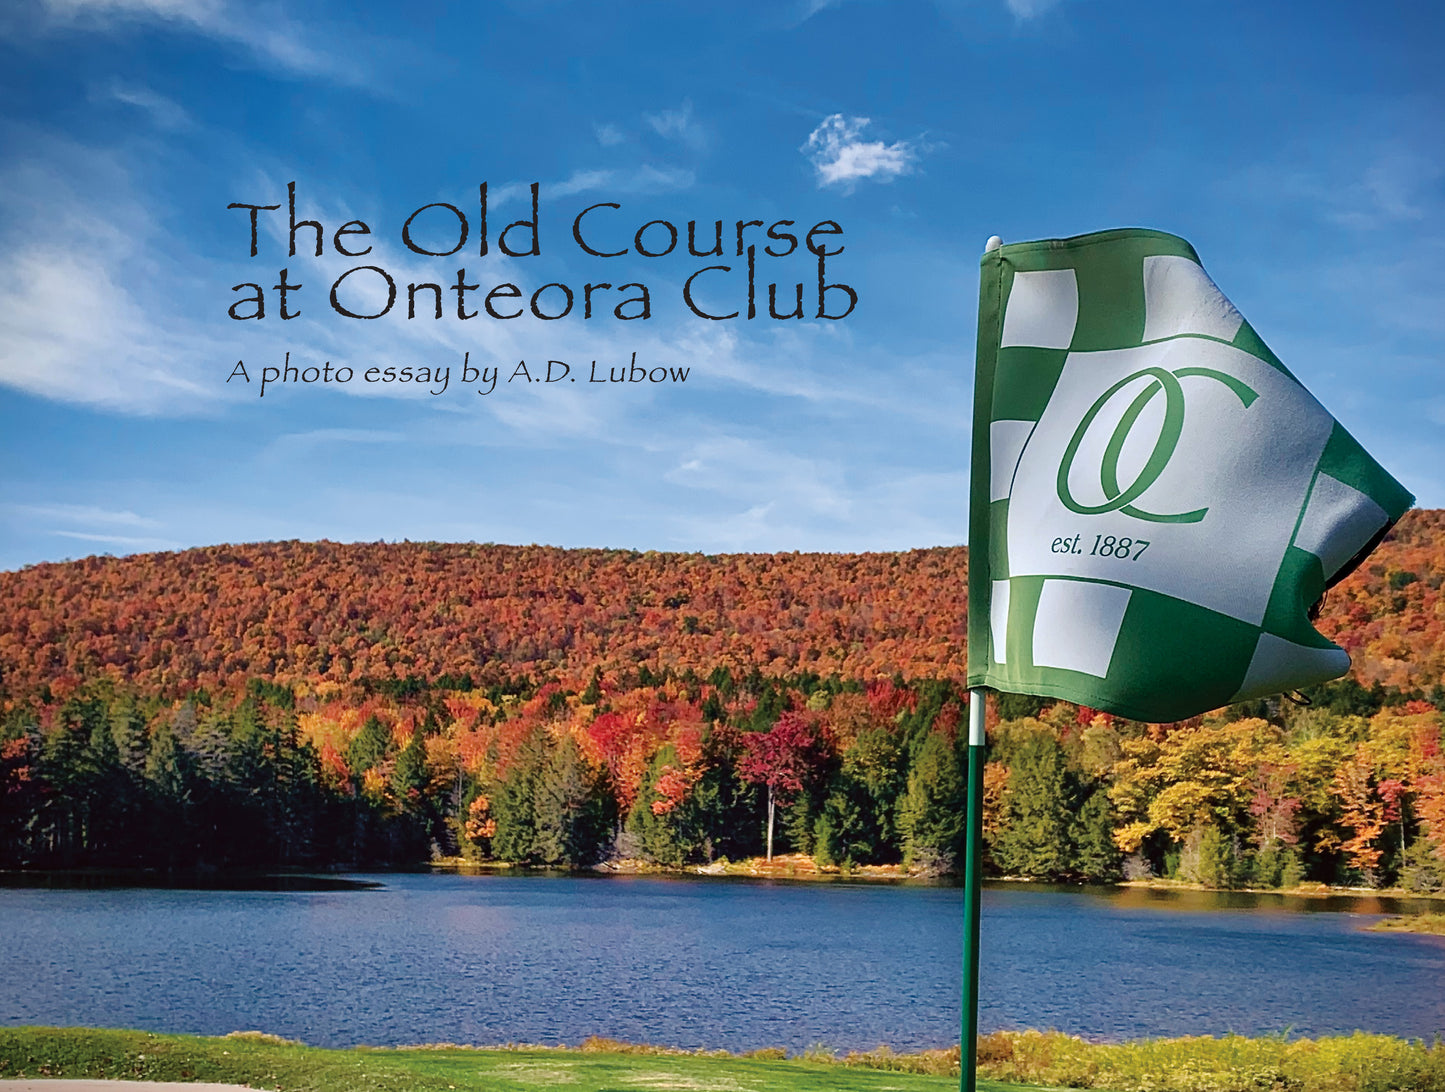 THE OLD COURSE AT ONTEORA CLUB: A Photo Essay